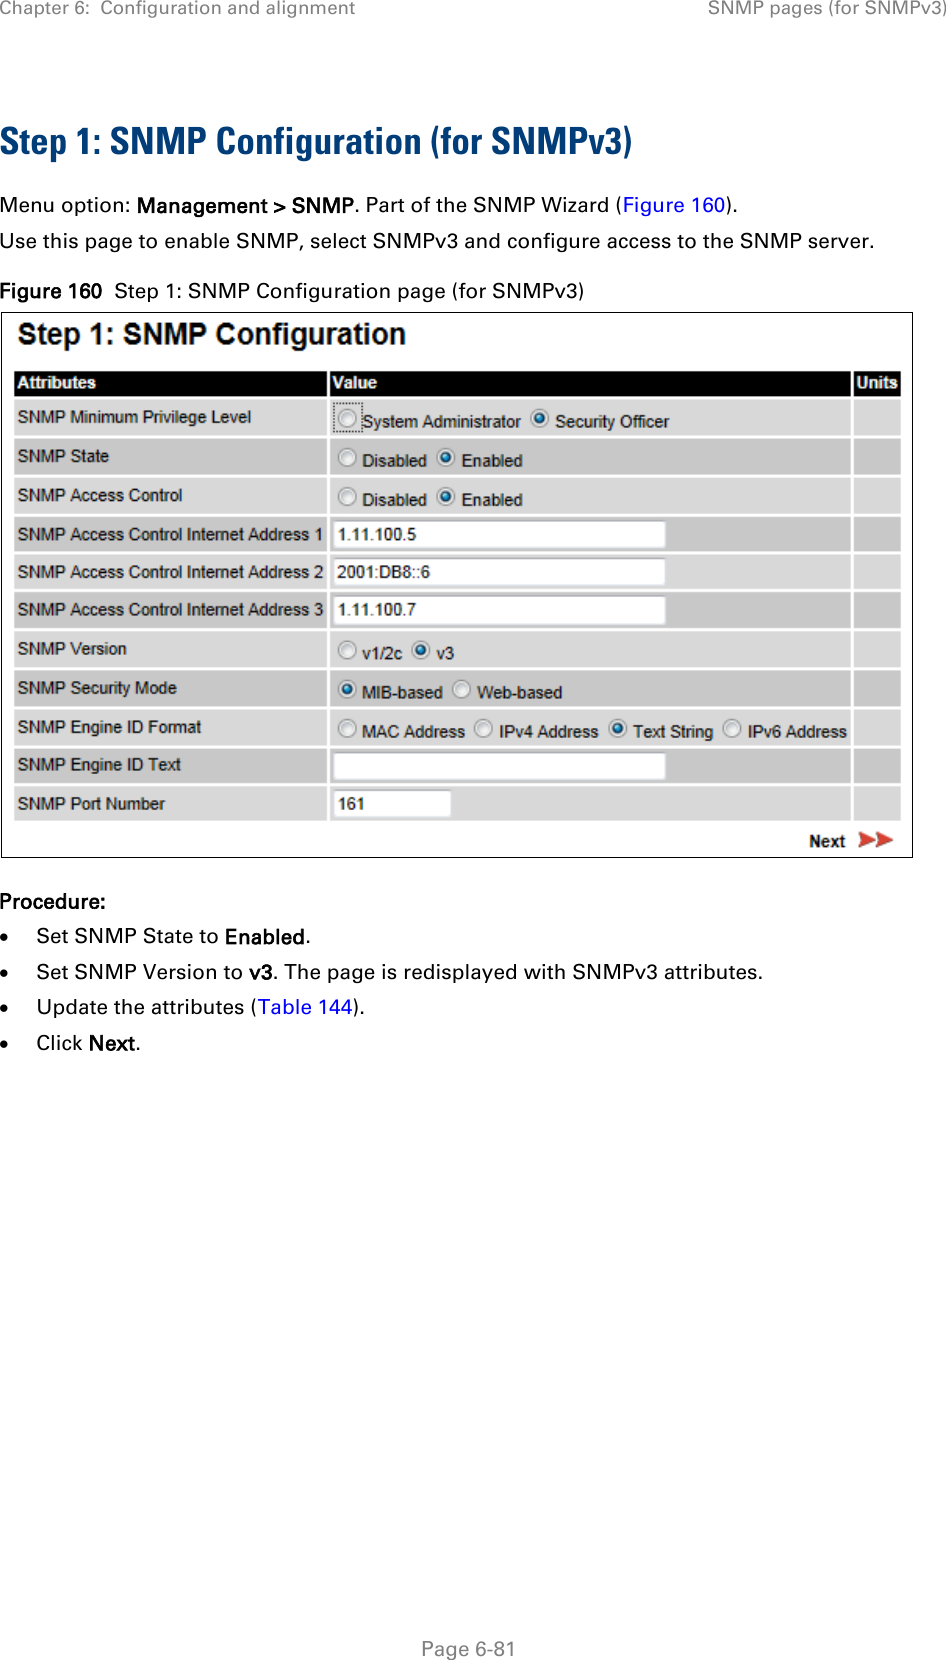 Chapter 6:  Configuration and alignment SNMP pages (for SNMPv3)  Step 1: SNMP Configuration (for SNMPv3) Menu option: Management &gt; SNMP. Part of the SNMP Wizard (Figure 160). Use this page to enable SNMP, select SNMPv3 and configure access to the SNMP server.  Figure 160  Step 1: SNMP Configuration page (for SNMPv3)  Procedure: • Set SNMP State to Enabled. • Set SNMP Version to v3. The page is redisplayed with SNMPv3 attributes. • Update the attributes (Table 144). • Click Next.      Page 6-81 